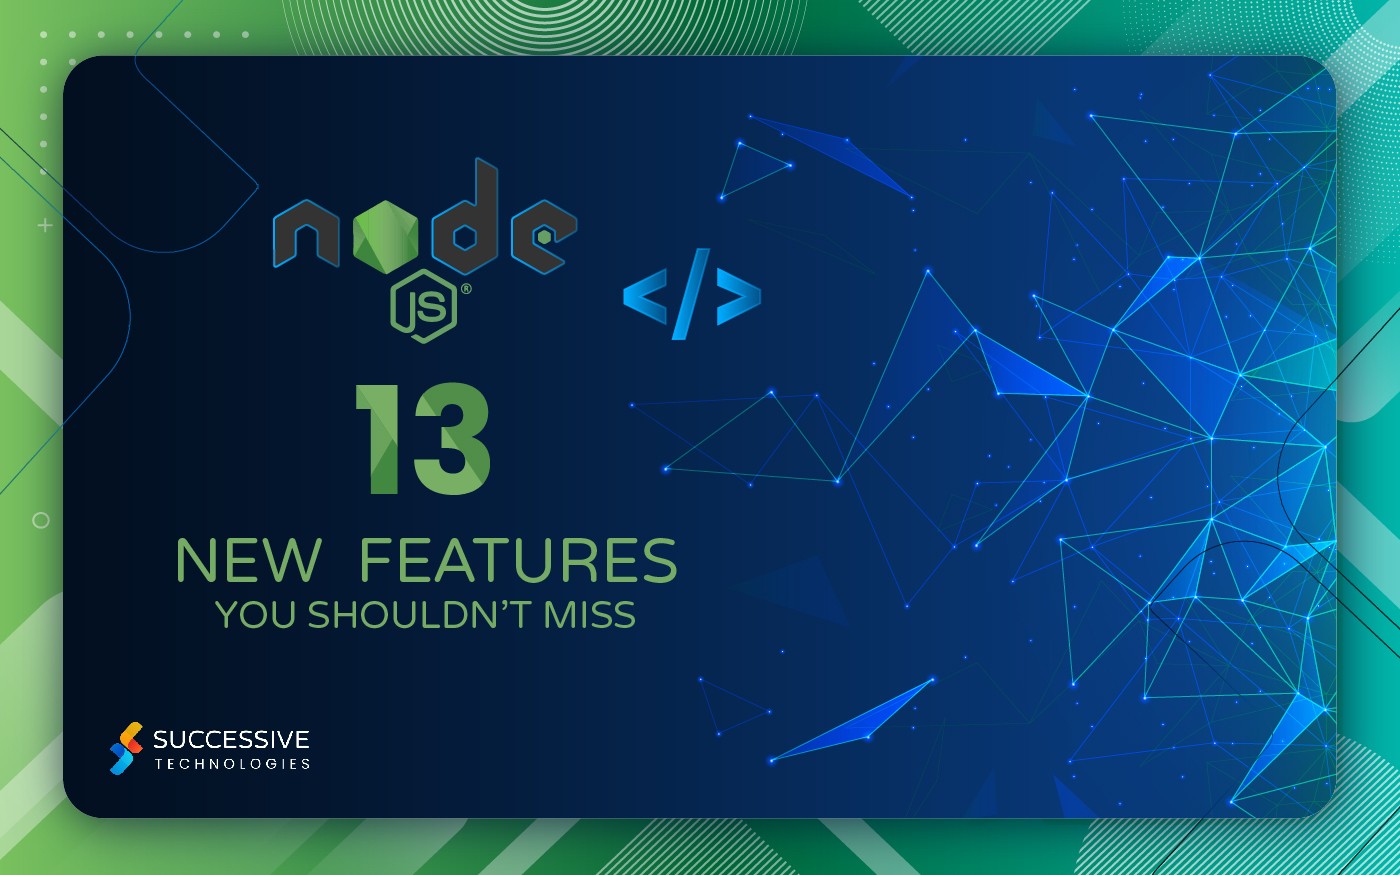 Node.js 13 Brings Enhanced Programming Features and Worker Threads